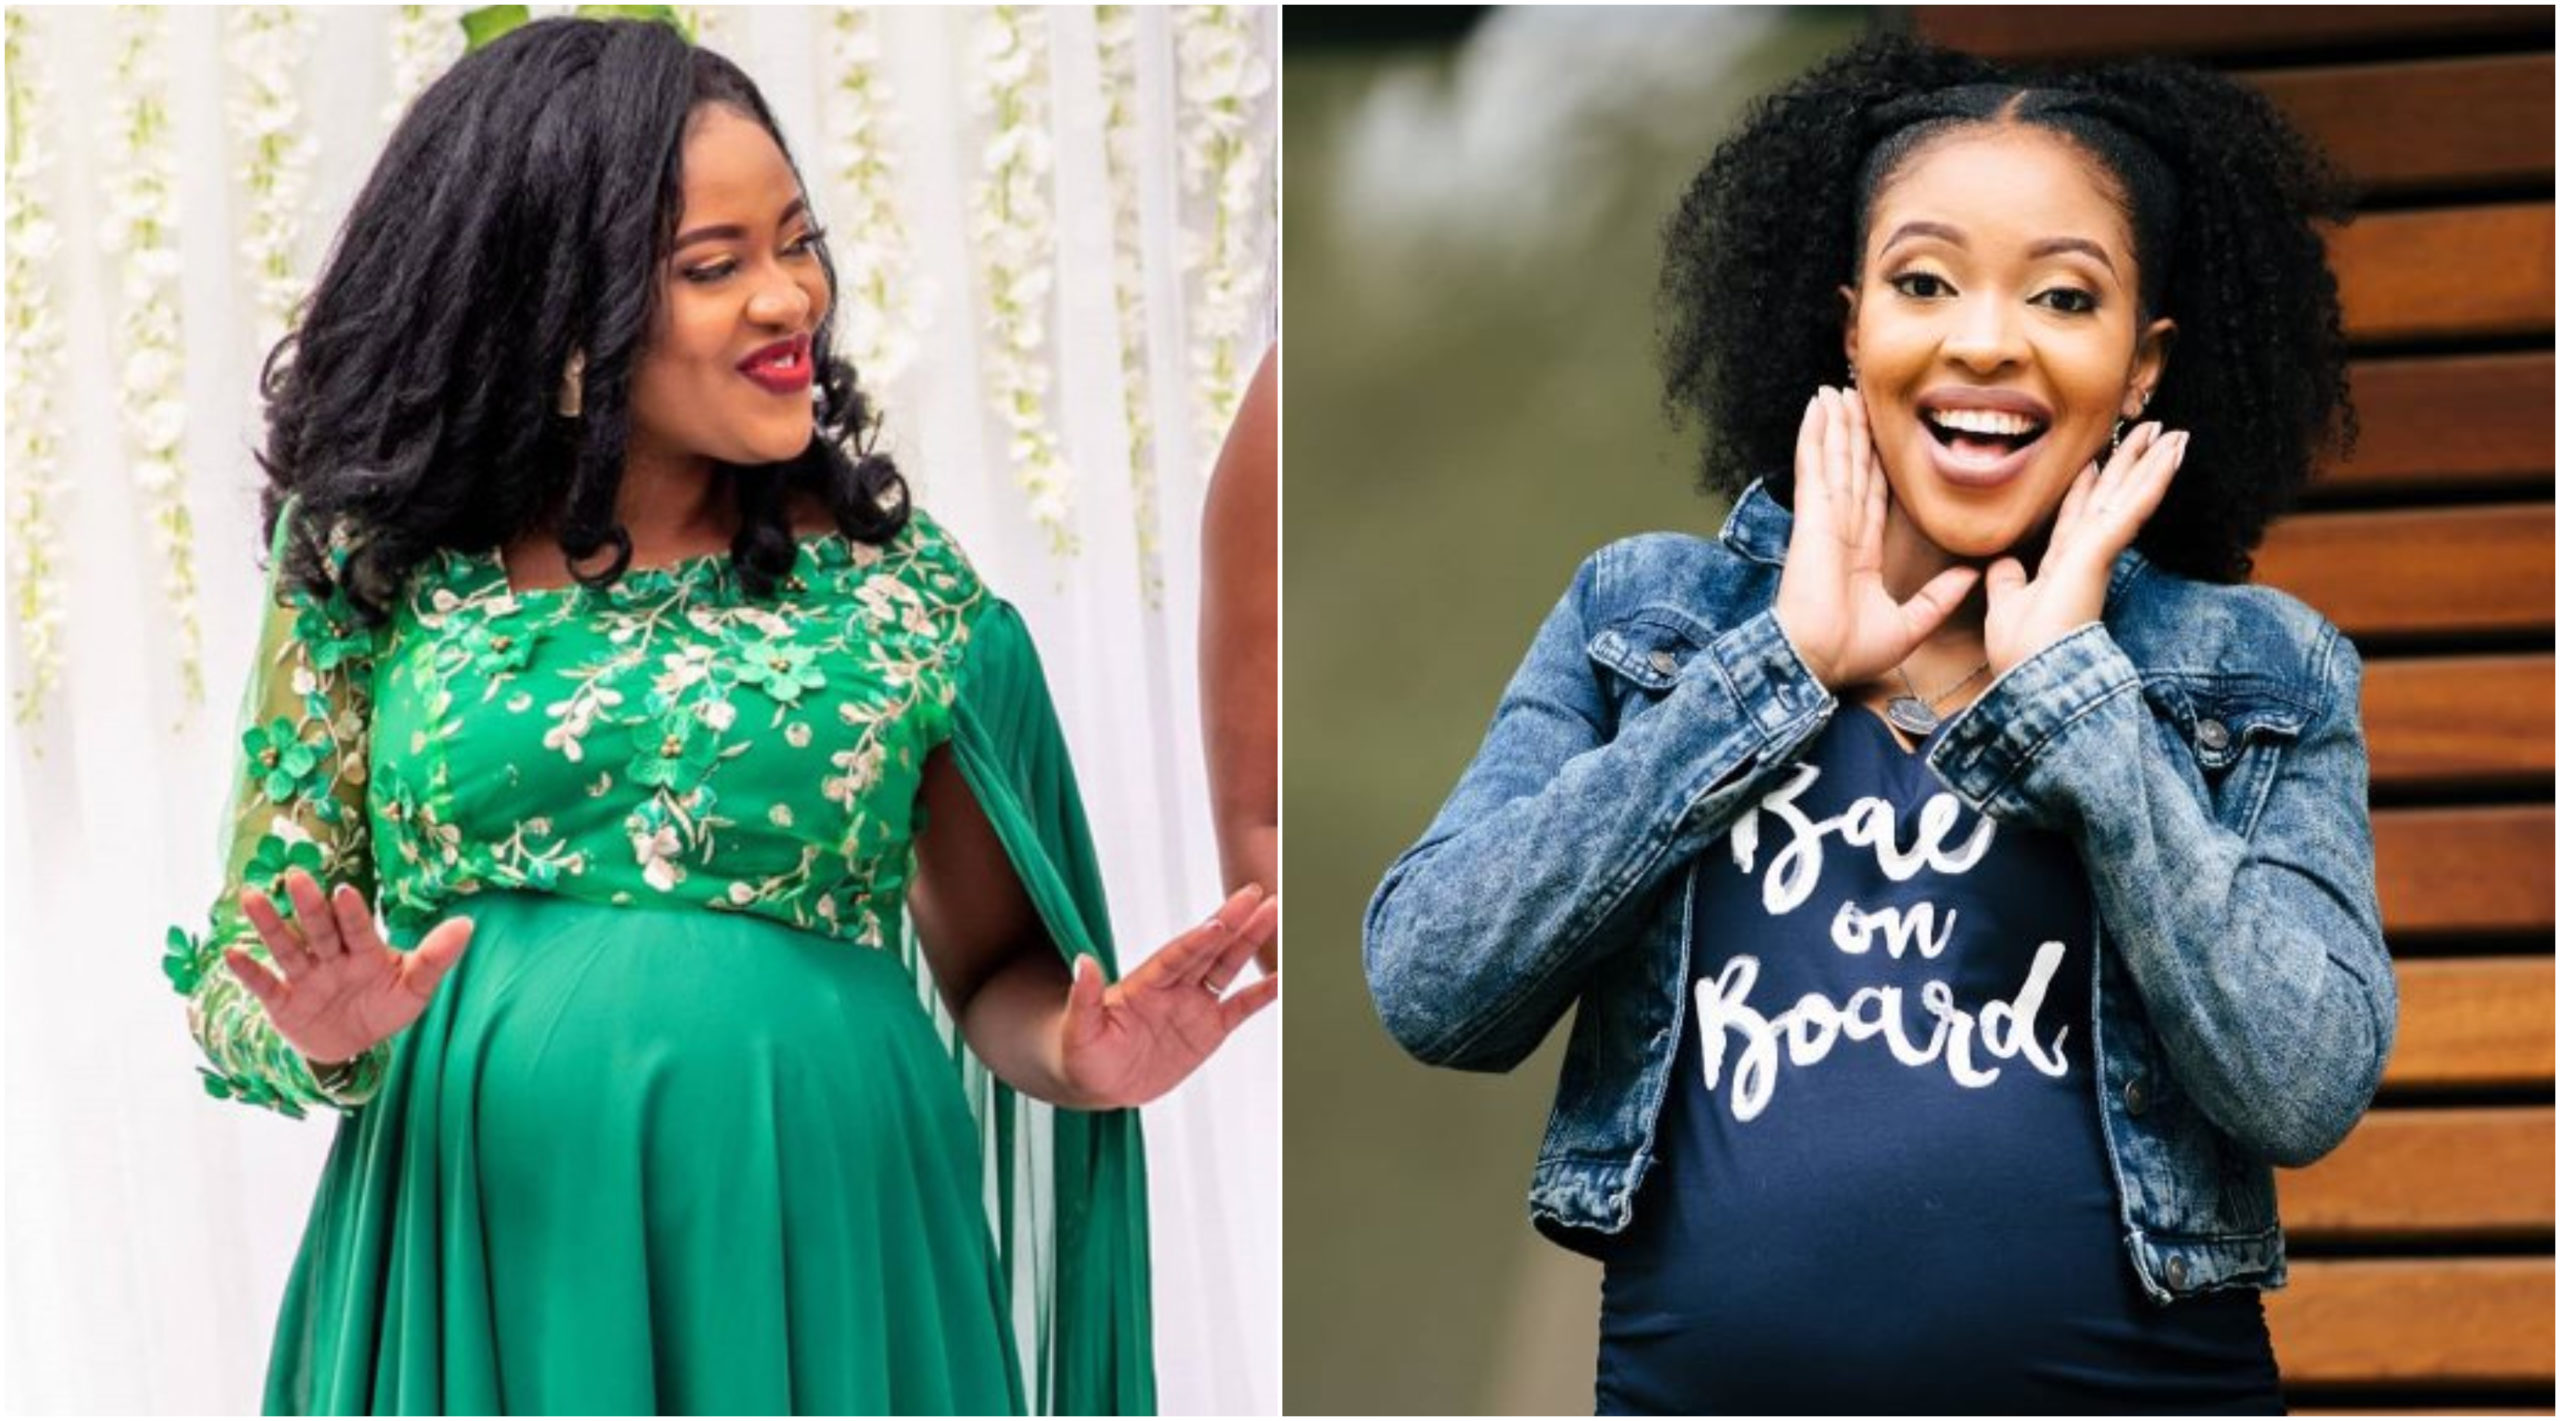 “2019, I held a newborn in my arms, 2020, another is kicking my ribs,” heavily pregnant Kambua pens heart-warming letter